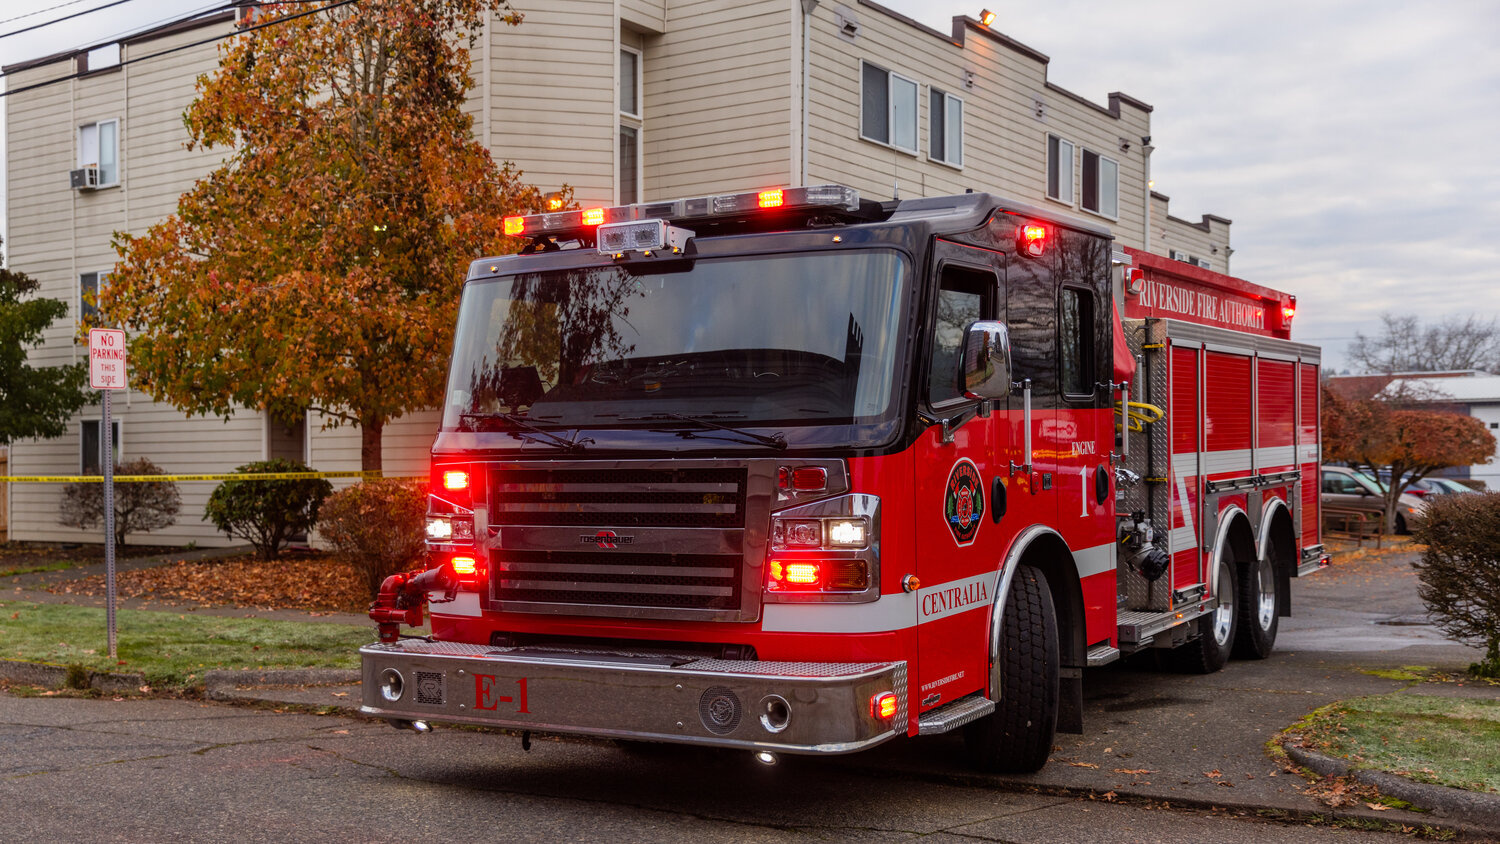 Riverside Fire Authority responds to a fire at the Centralia Manor Apartments Wednesday, Nov. 29.